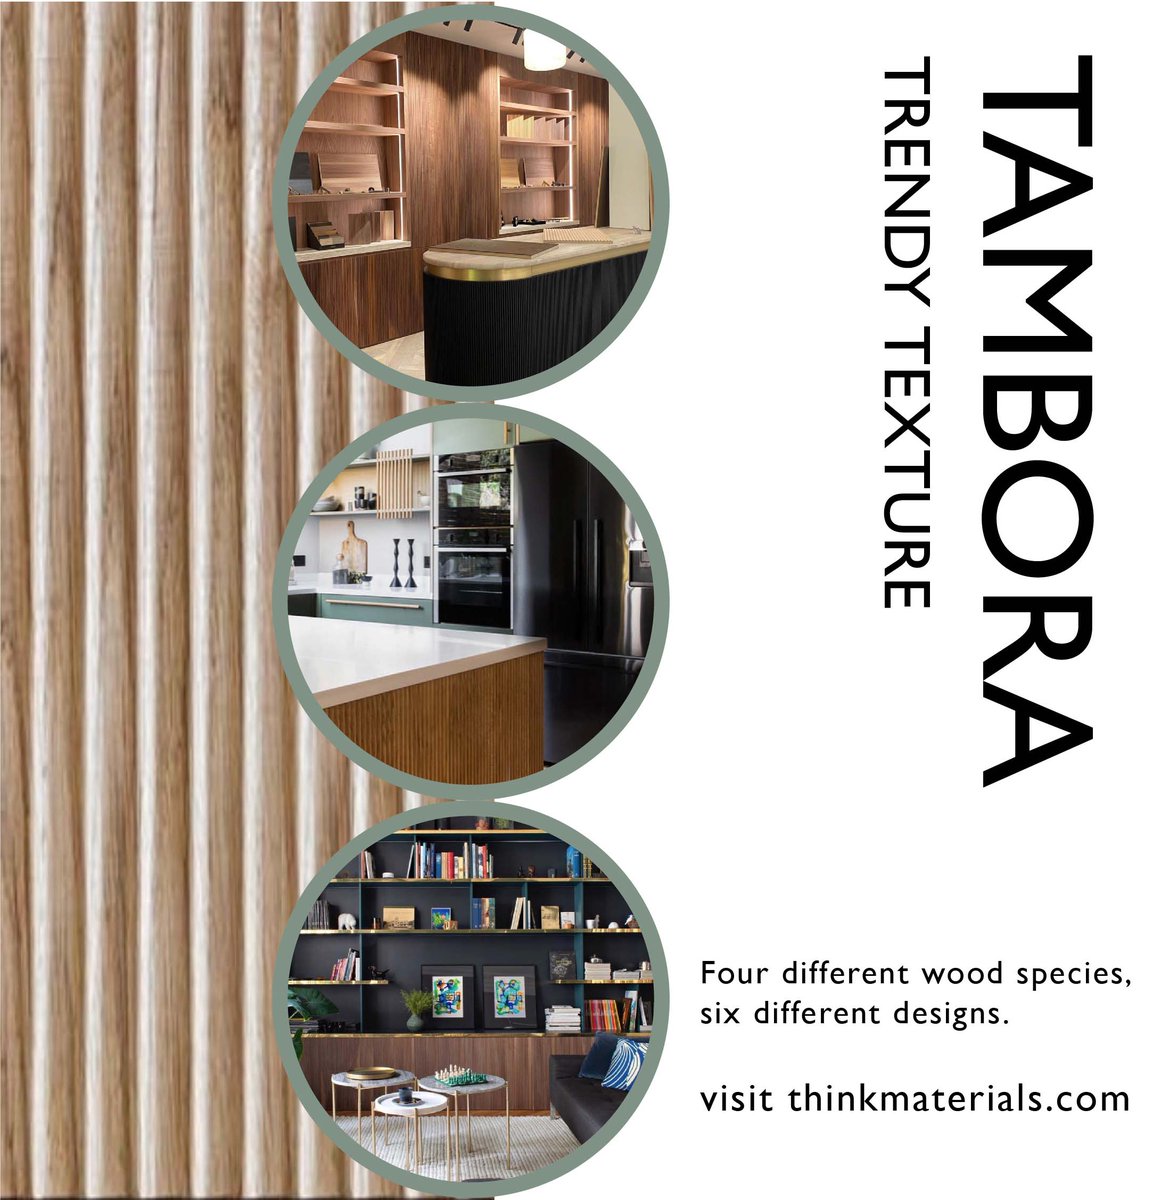 Slatted wood panels with different forms of textures, new possibilities with design || Tambora

For samples visit ThinkMaterials.com
We give you samples and service.

#modern #design #woodpanels #materials #architecture #interior